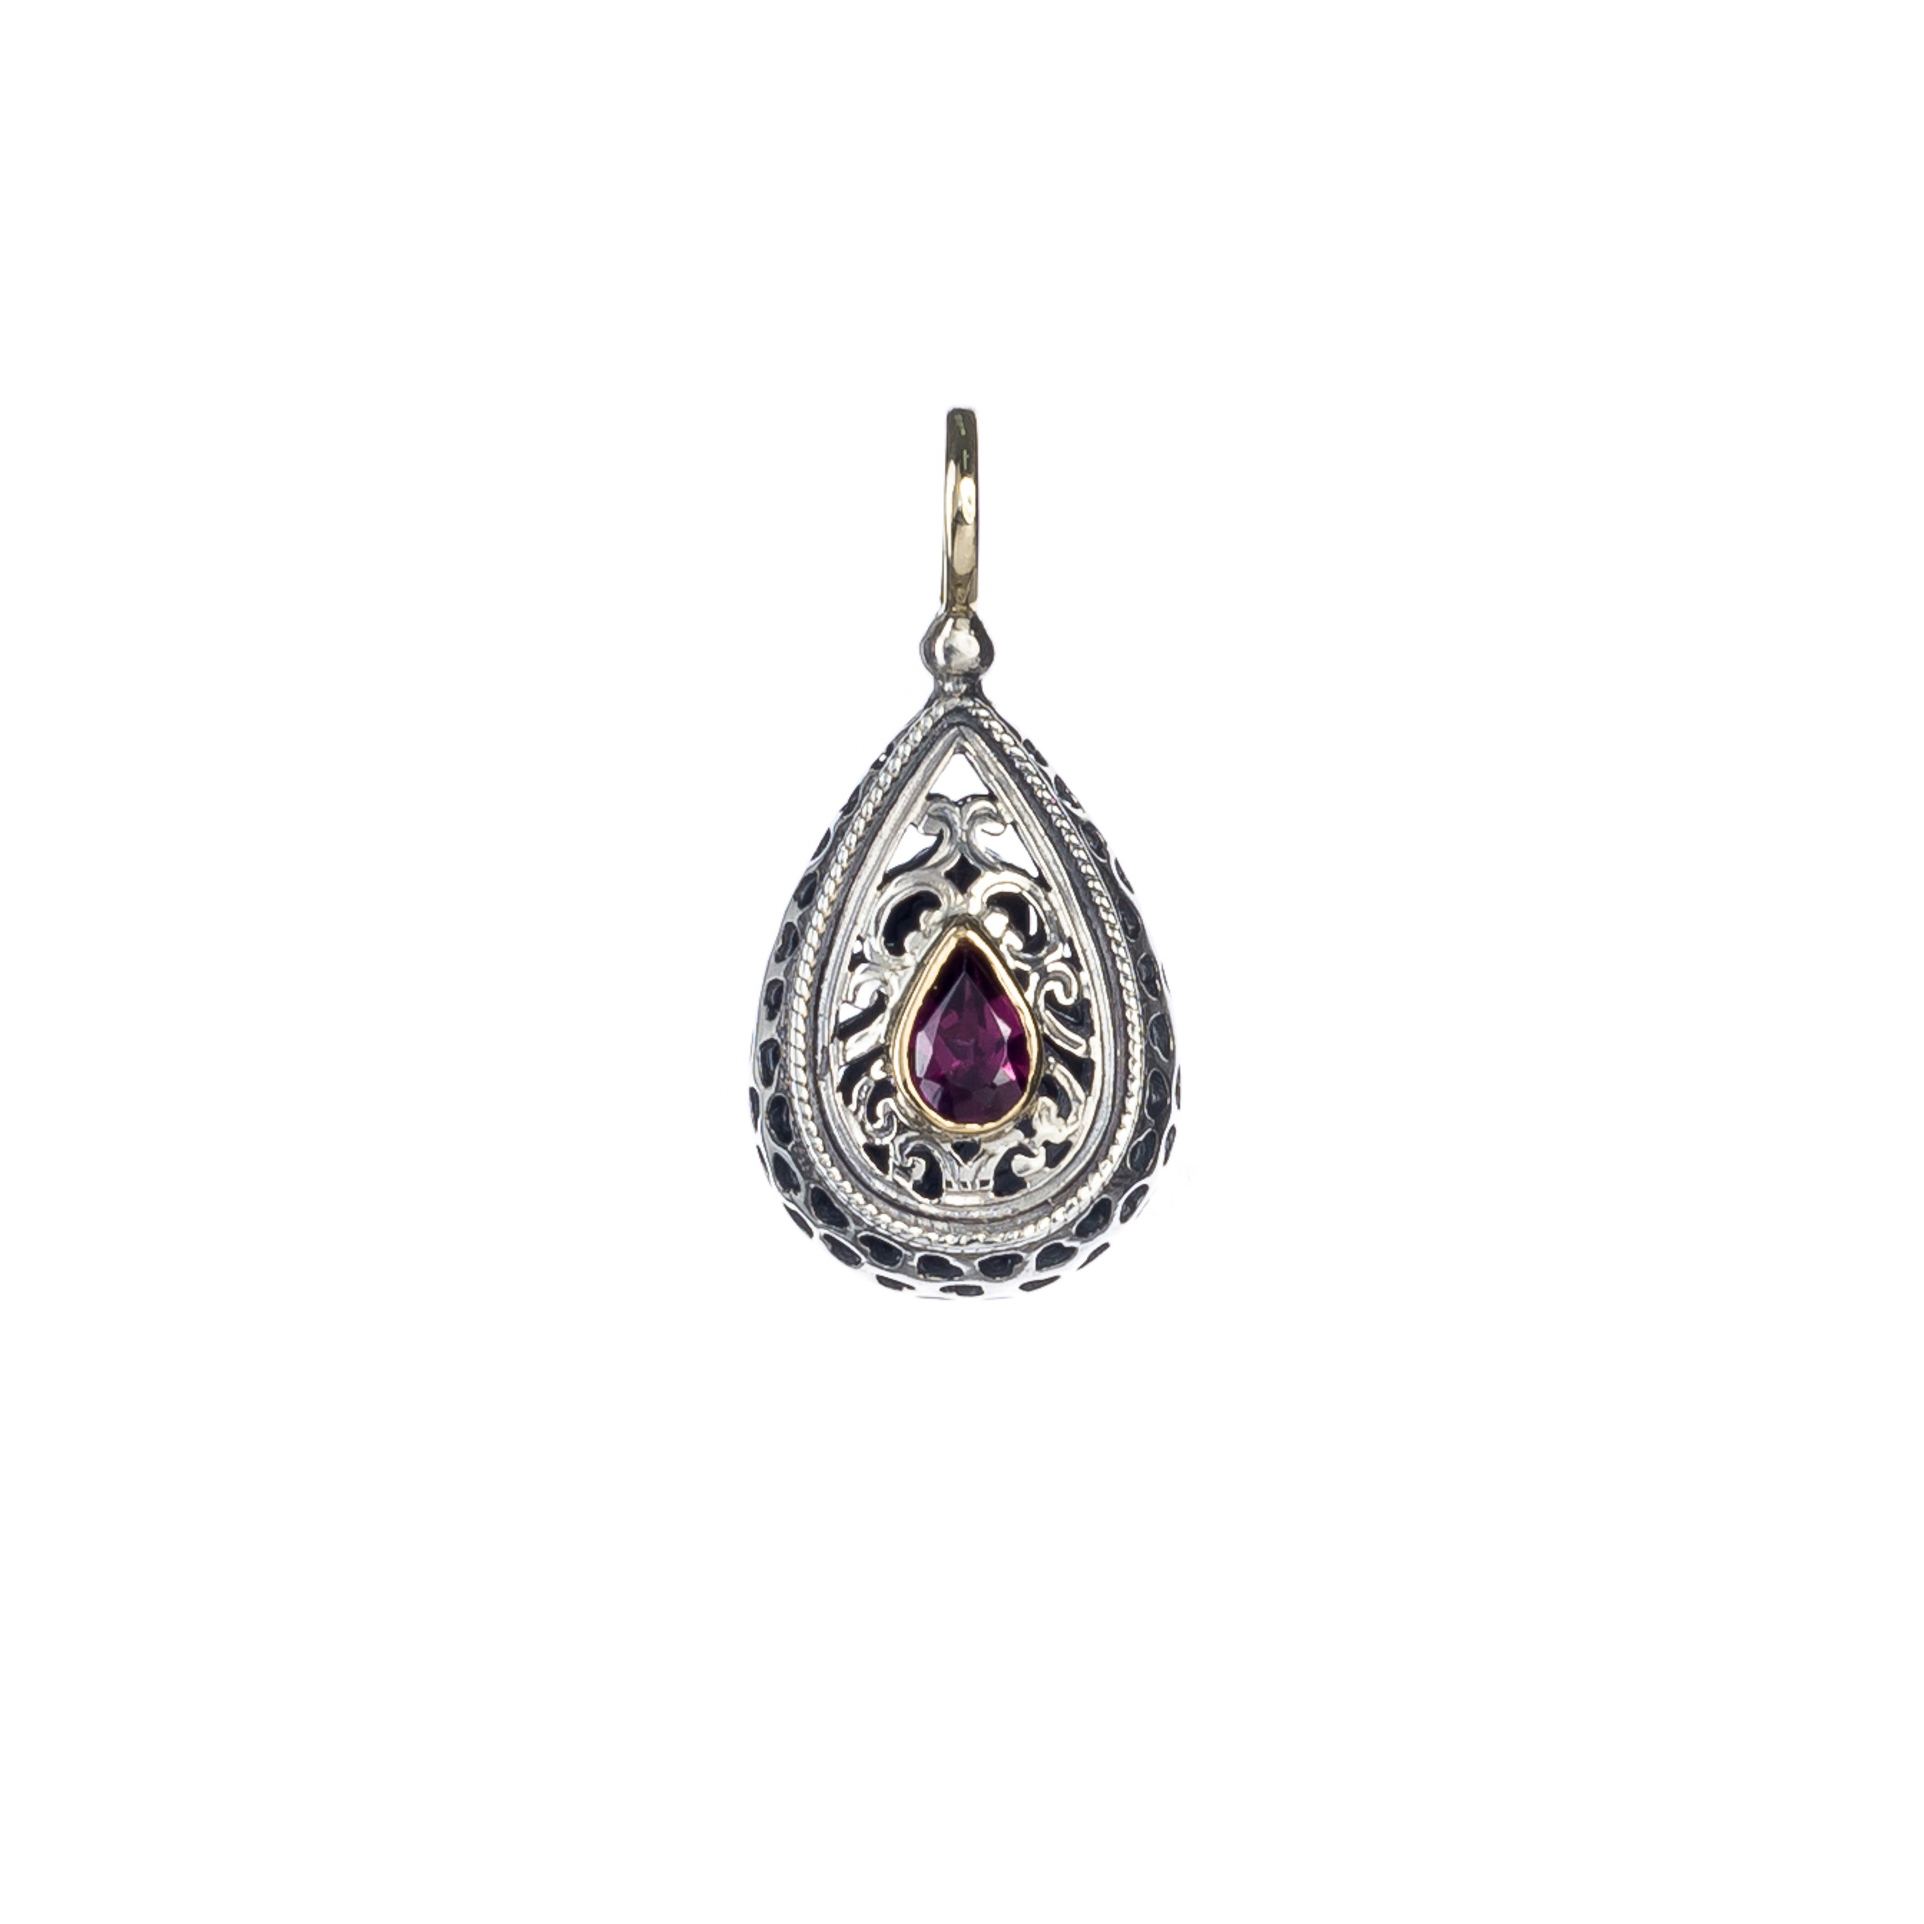 Garden shadows drop pendant in 18K Gold and Sterling Silver with rhodolite